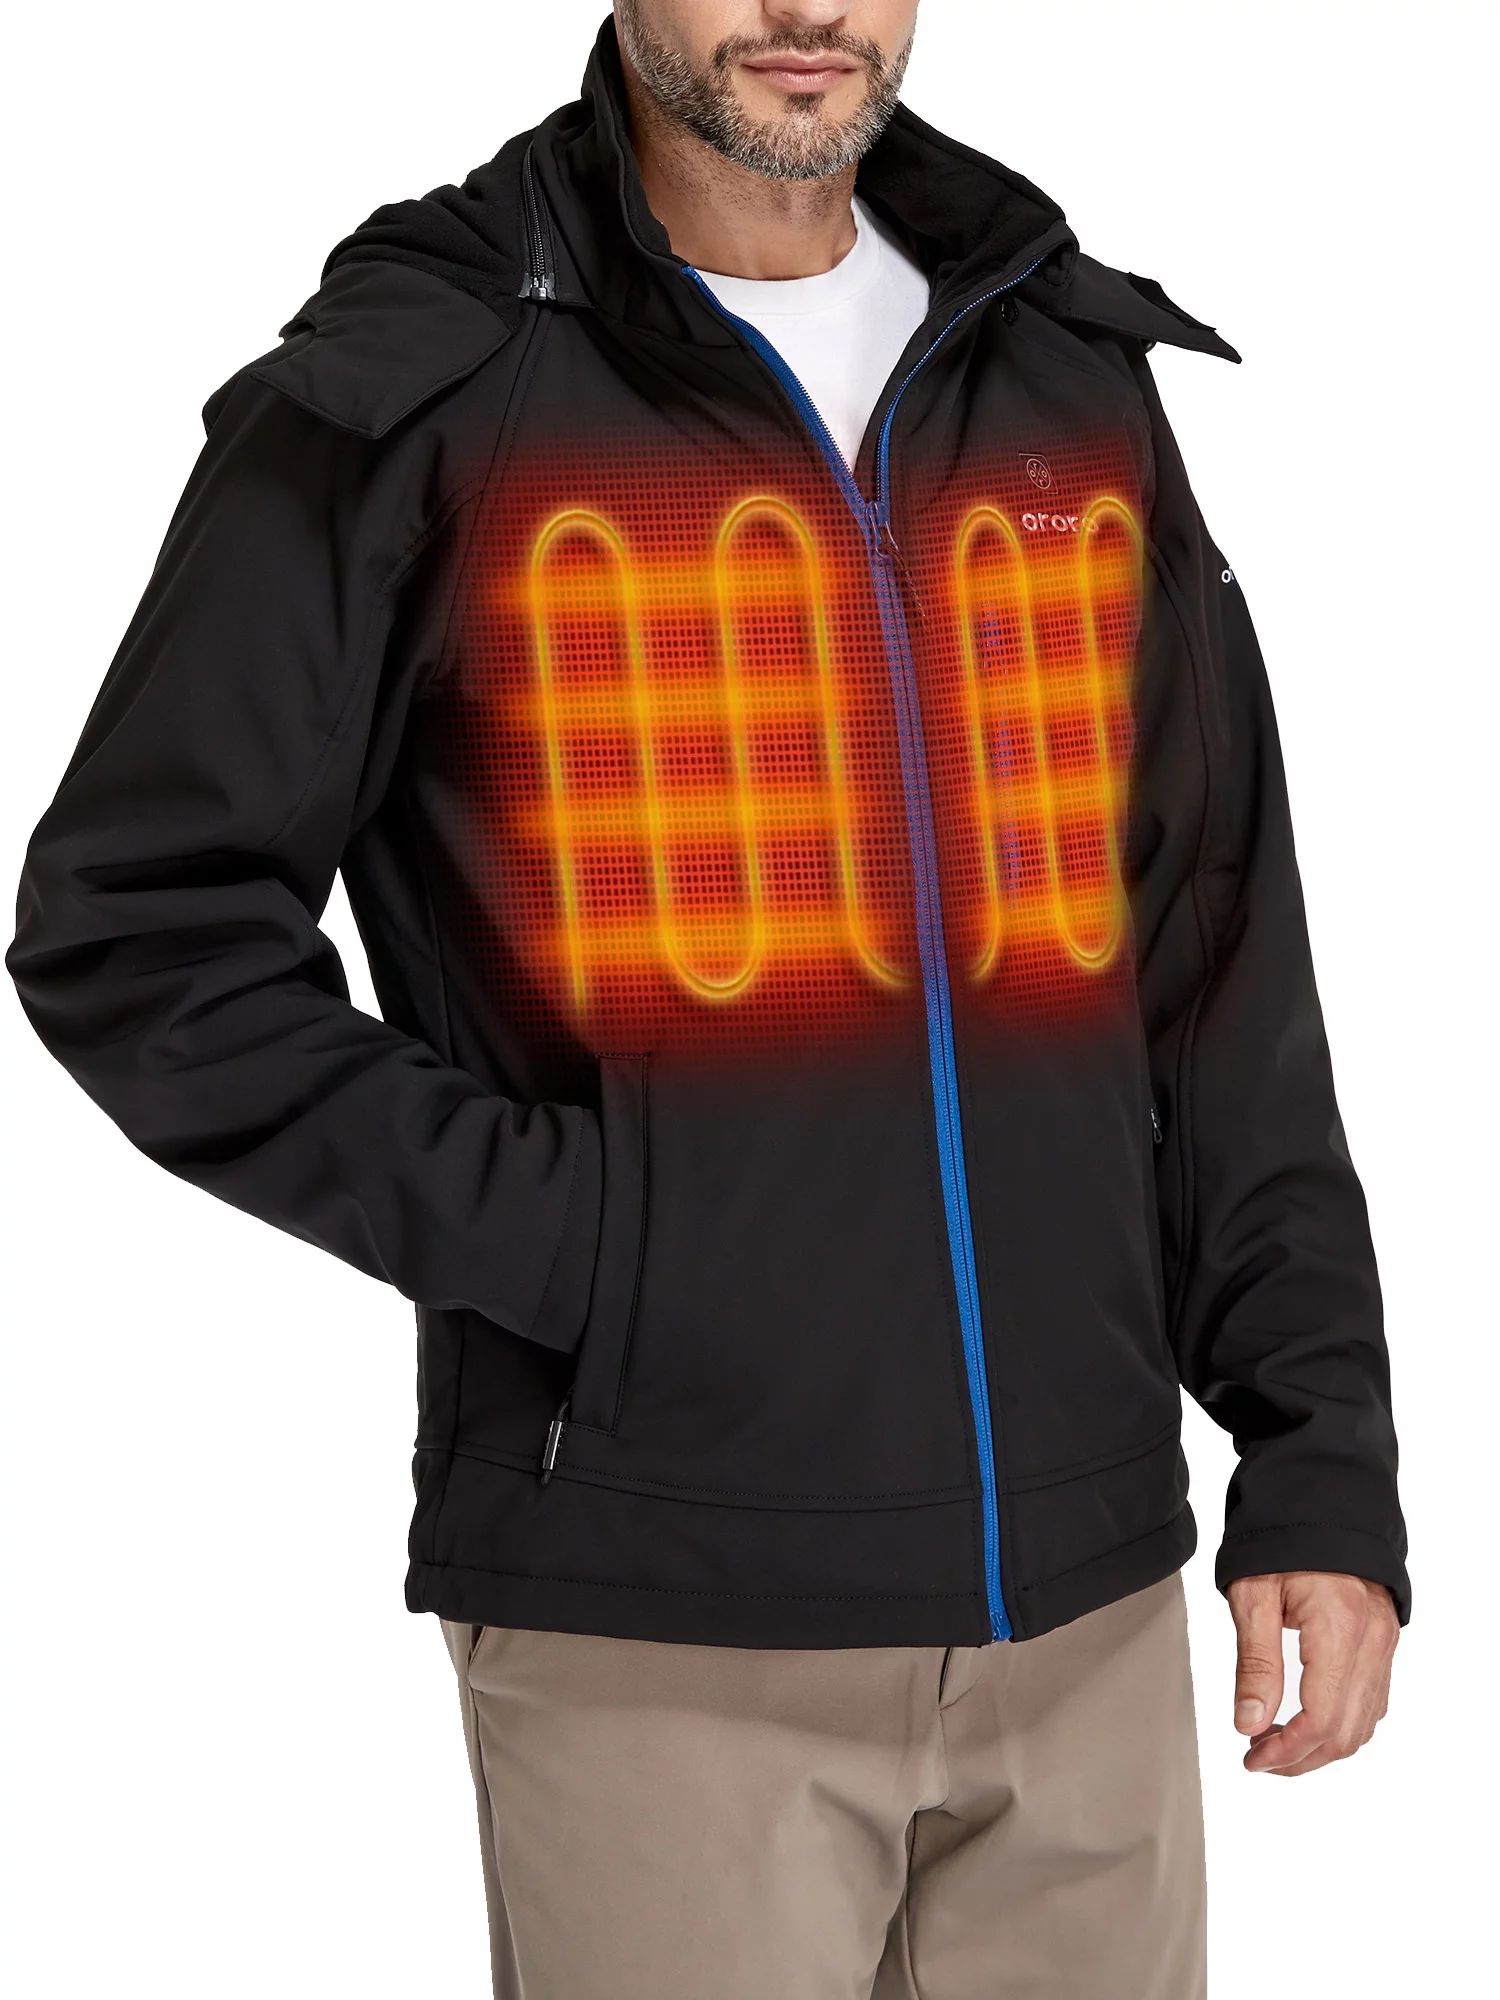 ORORO Men’s Heated Jacket with Battery, Heating Jacket with Removable Hood for Winter Outdoors ... | Walmart (US)